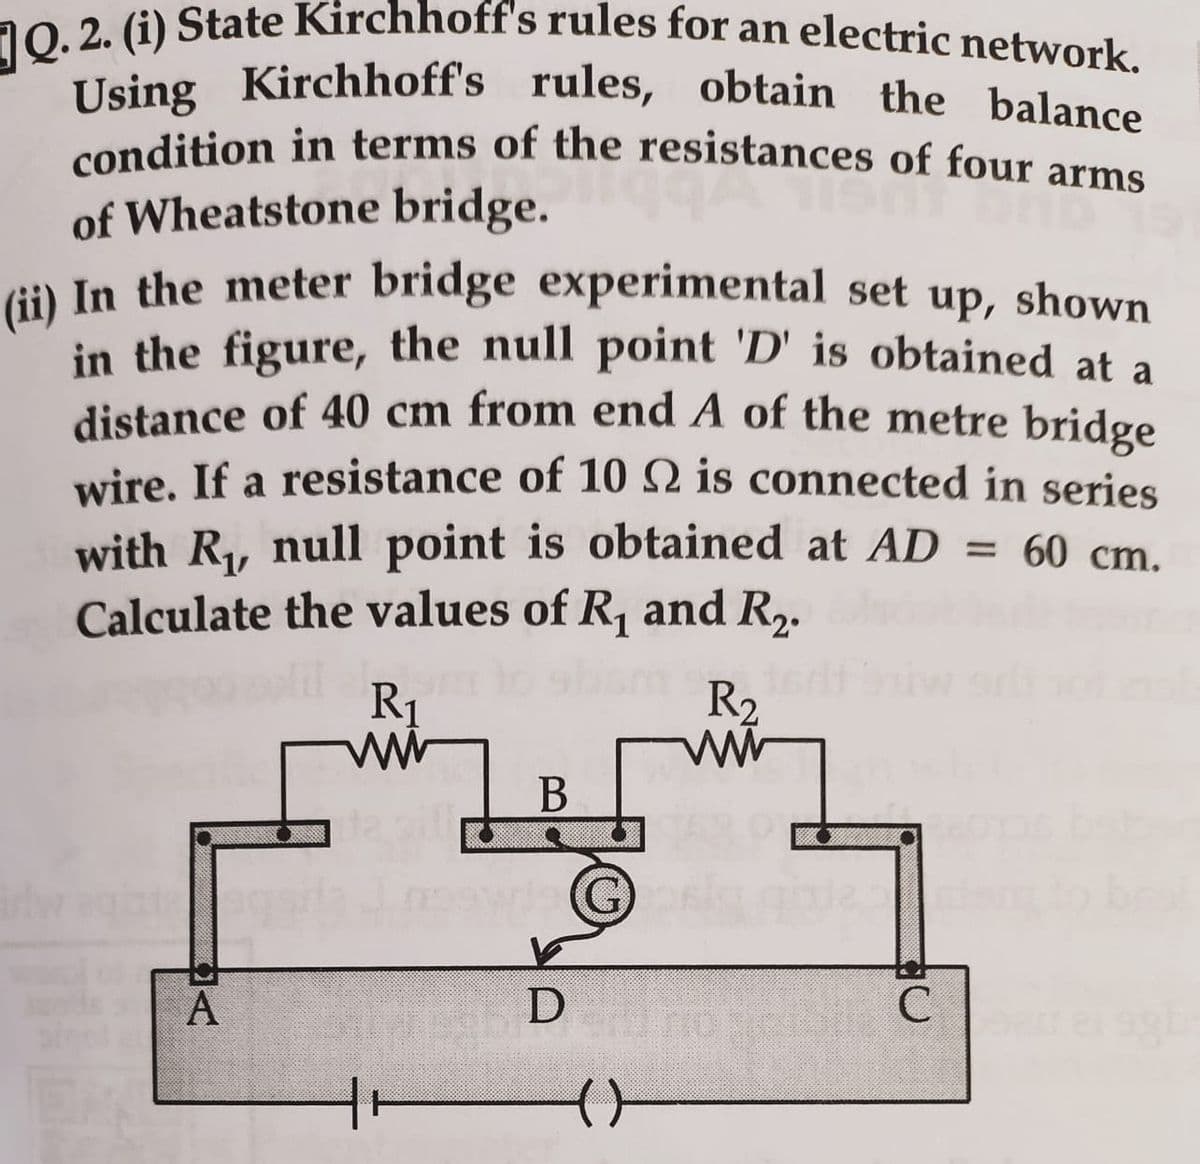 Q. 2. (i) State Kirchhoff's rules for an electric network.
Using Kirchhoff's rules, obtain the balance
condition in terms of the resistances of four arms
of Wheatstone bridge.
(ii) In the meter bridge experimental set up, shown
in the figure, the null point 'D' is obtained at a
distance of 40 cm from end A of the metre bridge
wire. If a resistance of 10 2 is connected in series
with R₁, null point is obtained at AD = 60 cm.
Calculate the values of R₁ and R₂.
A
R₁
ww
B
V
D
G)
(
R₂
www
C